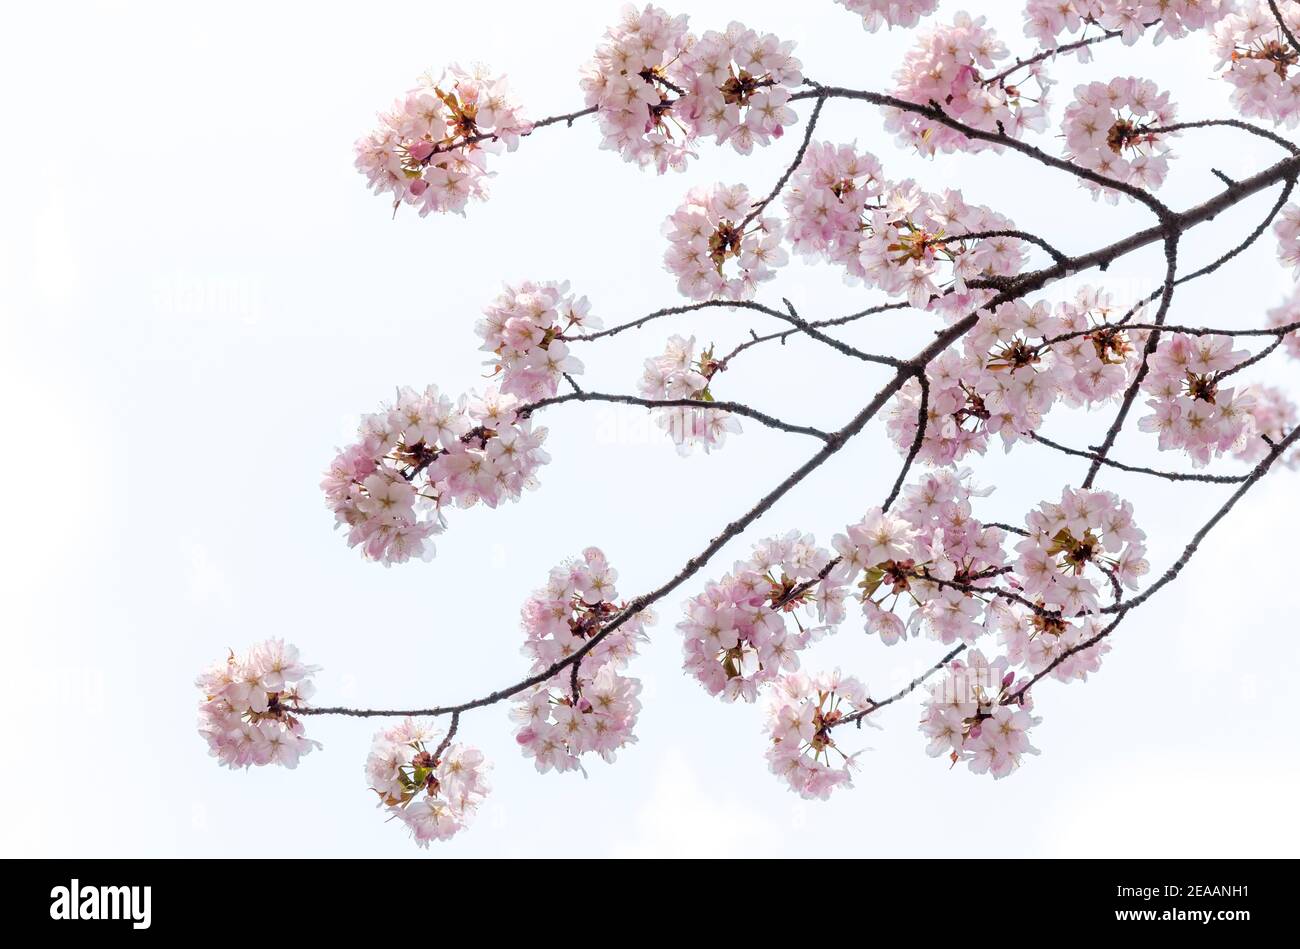 A branch with Sukura Cherry blossoms in full bloom. Stock Photo